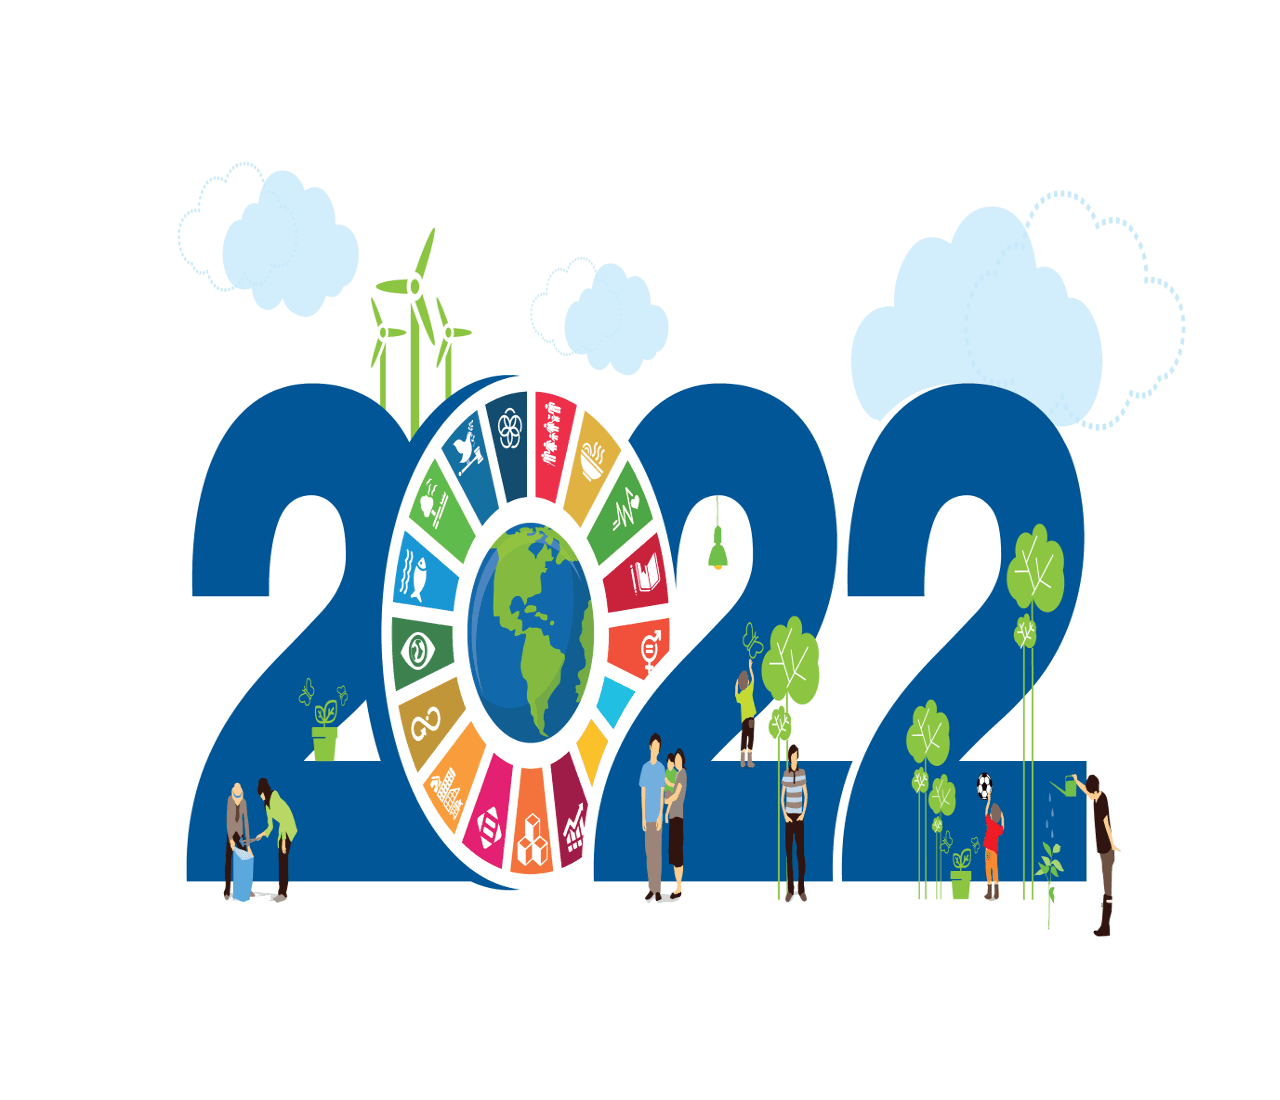 Ethical & sustainable New Year’s resolutions for 2022